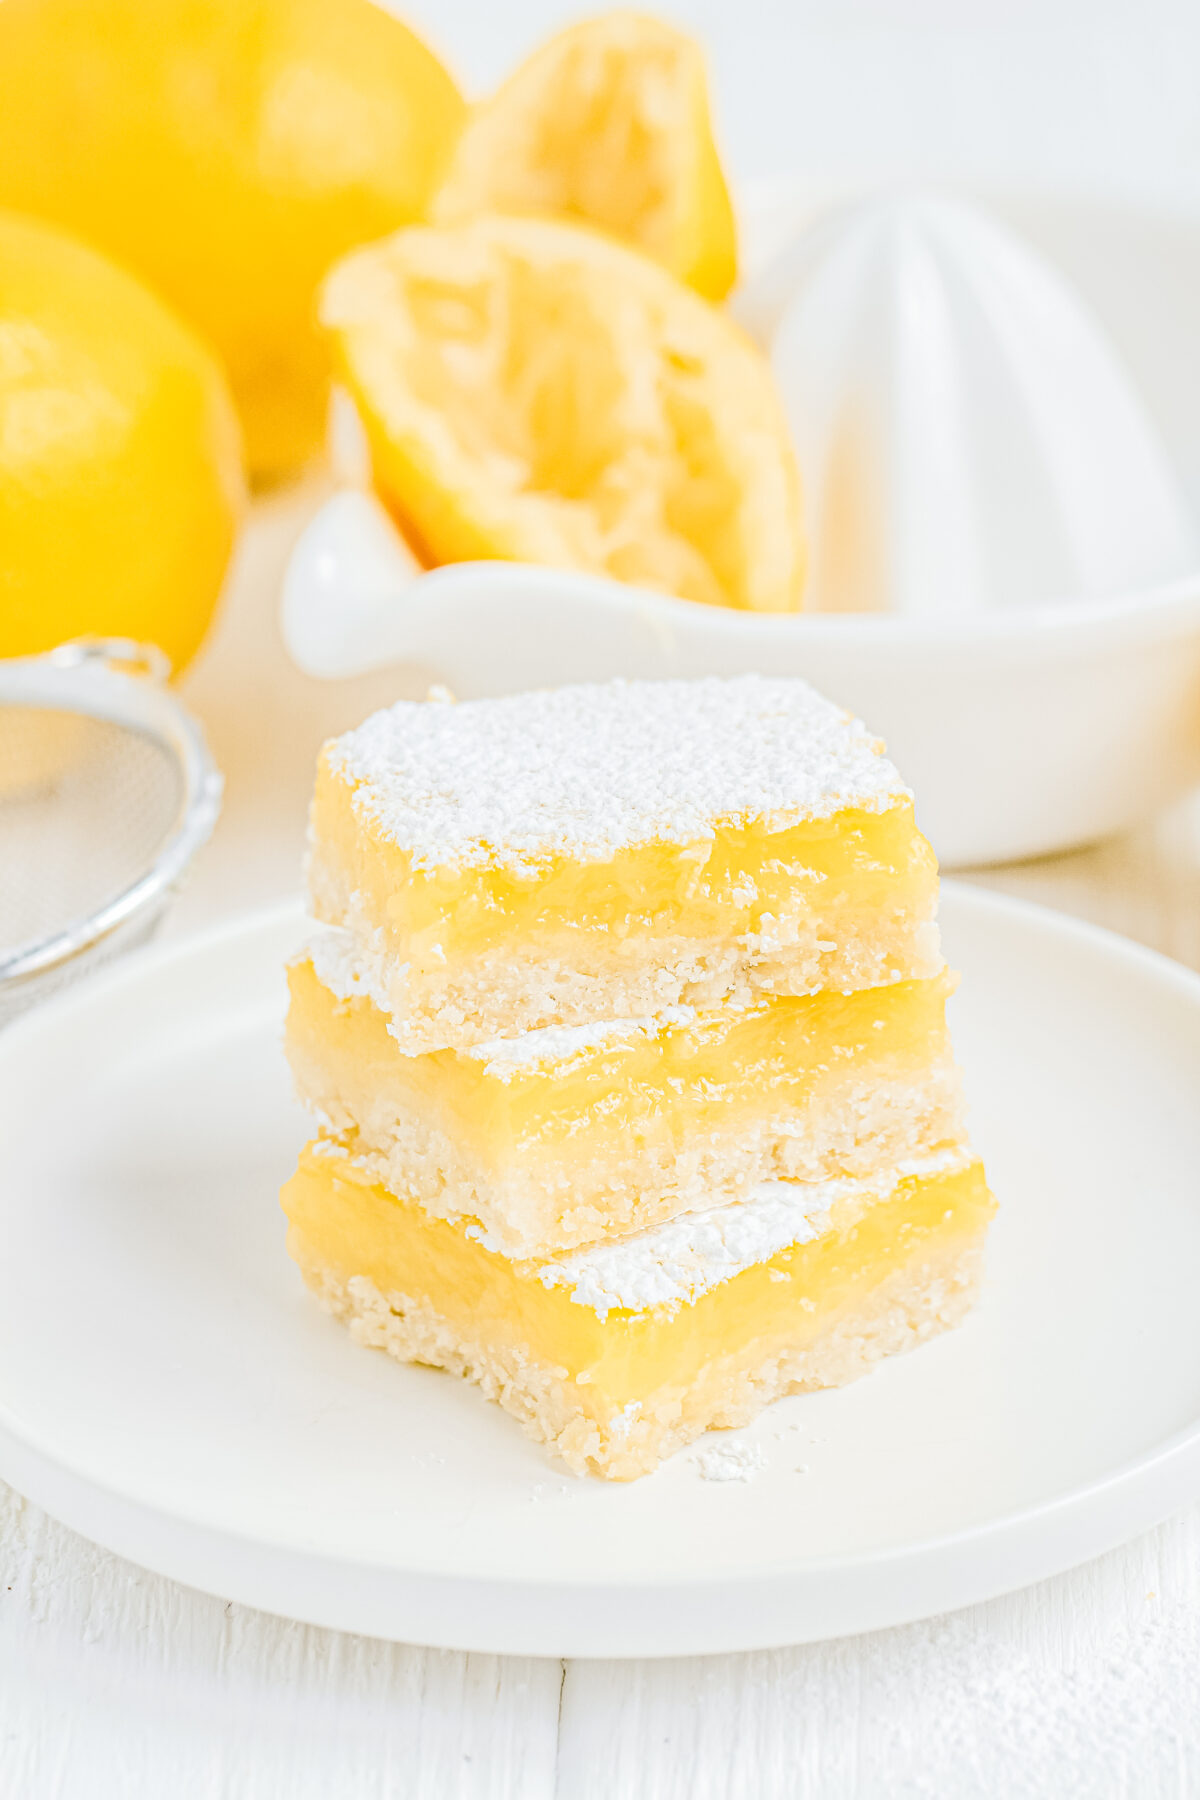 This is the best lemon bars recipe you'll ever make! Tart, sweet, and delicious with buttery shortbread crust - perfect for any occasion.